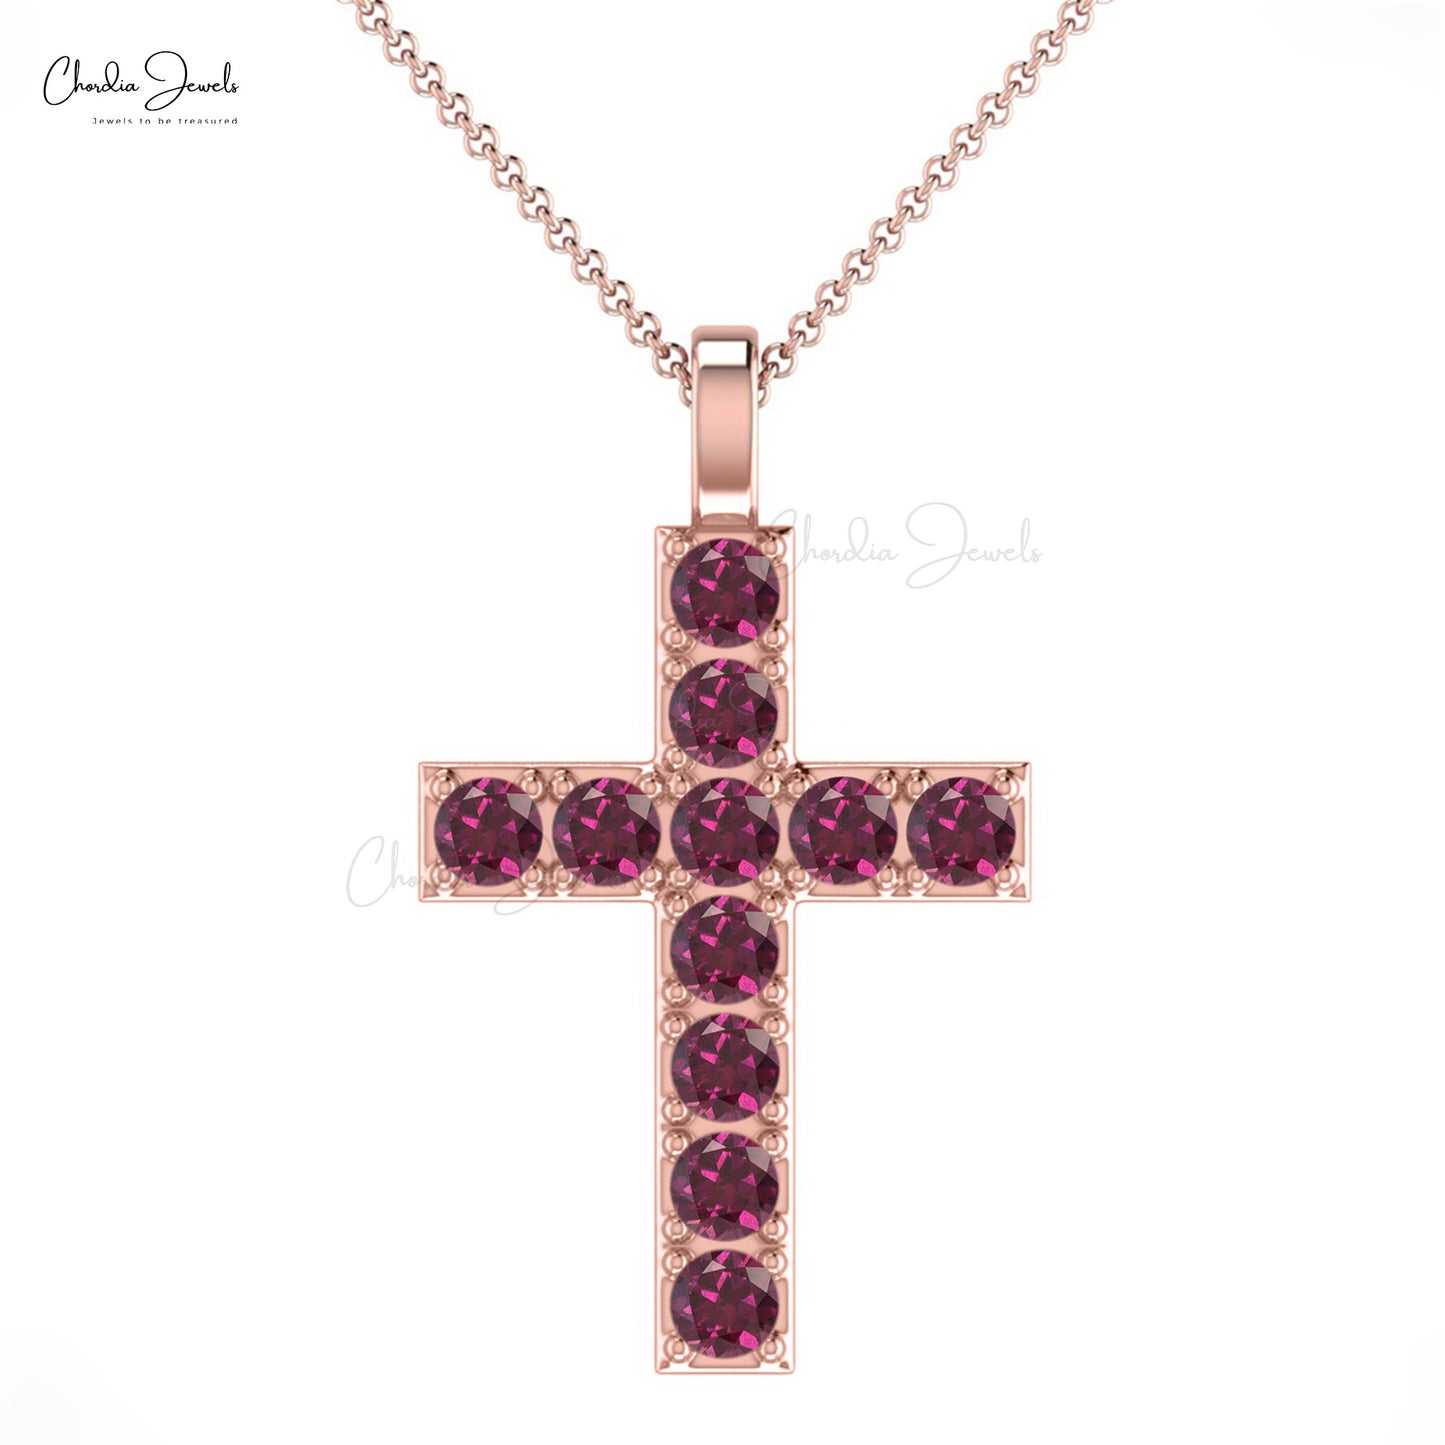 Buy Holy Cross Pendant, Natural Multi Stone Pendant Necklace, 925 Sterling  Silver, Charm Pendant, Gemstone Pendant, Bridal Pendant, Gift for Her  Online in India - Etsy